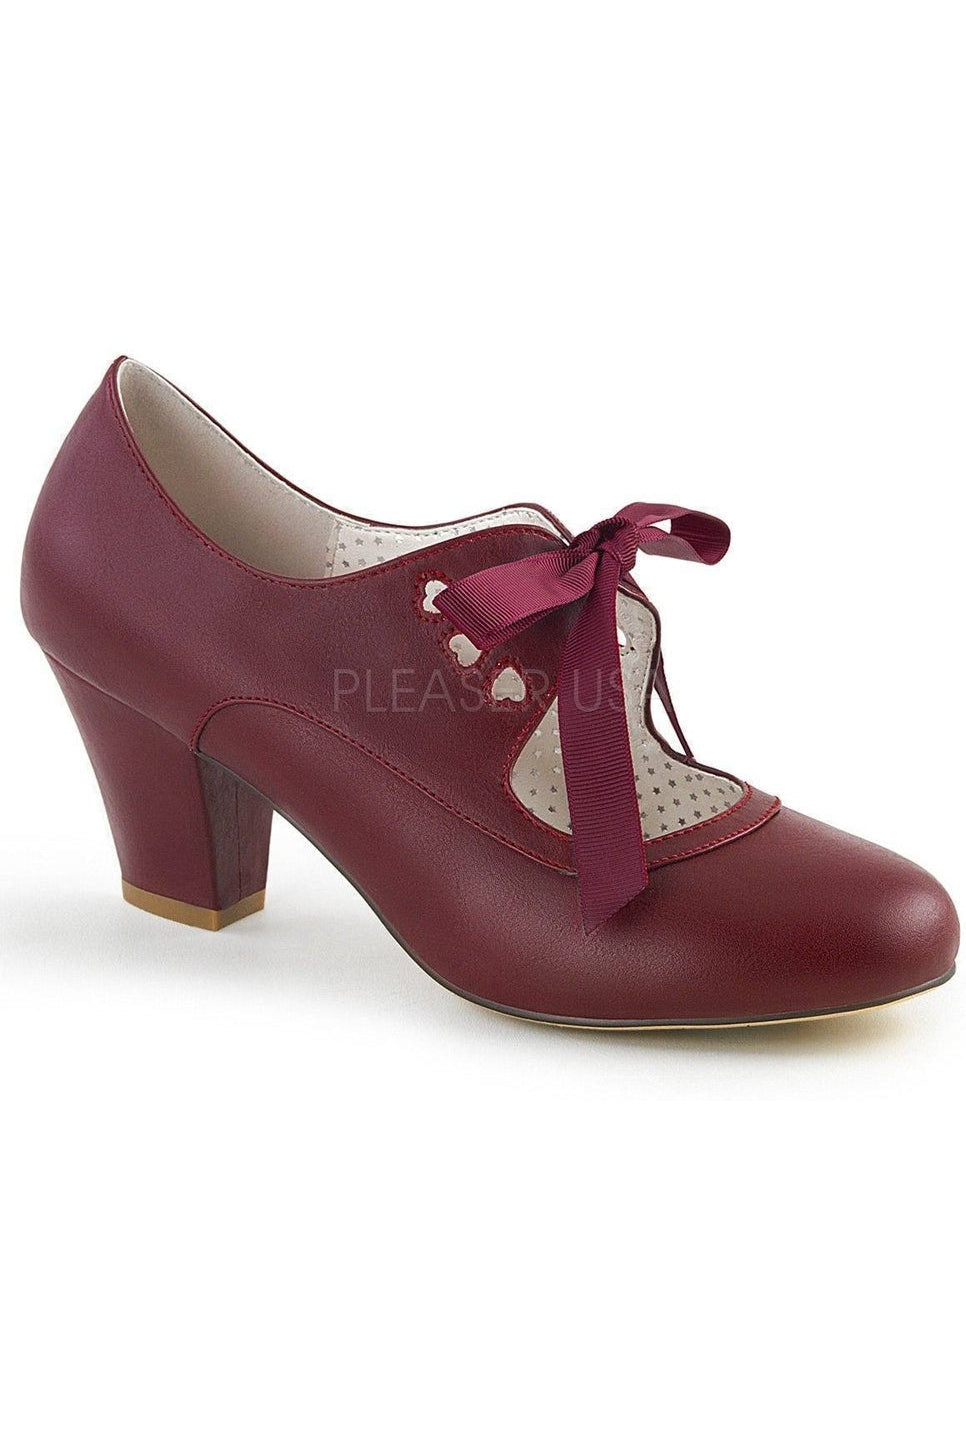 WIGGLE-32 Pump | Burgundy Faux Leather-Pin Up Couture-Burgundy-Mary Janes-SEXYSHOES.COM